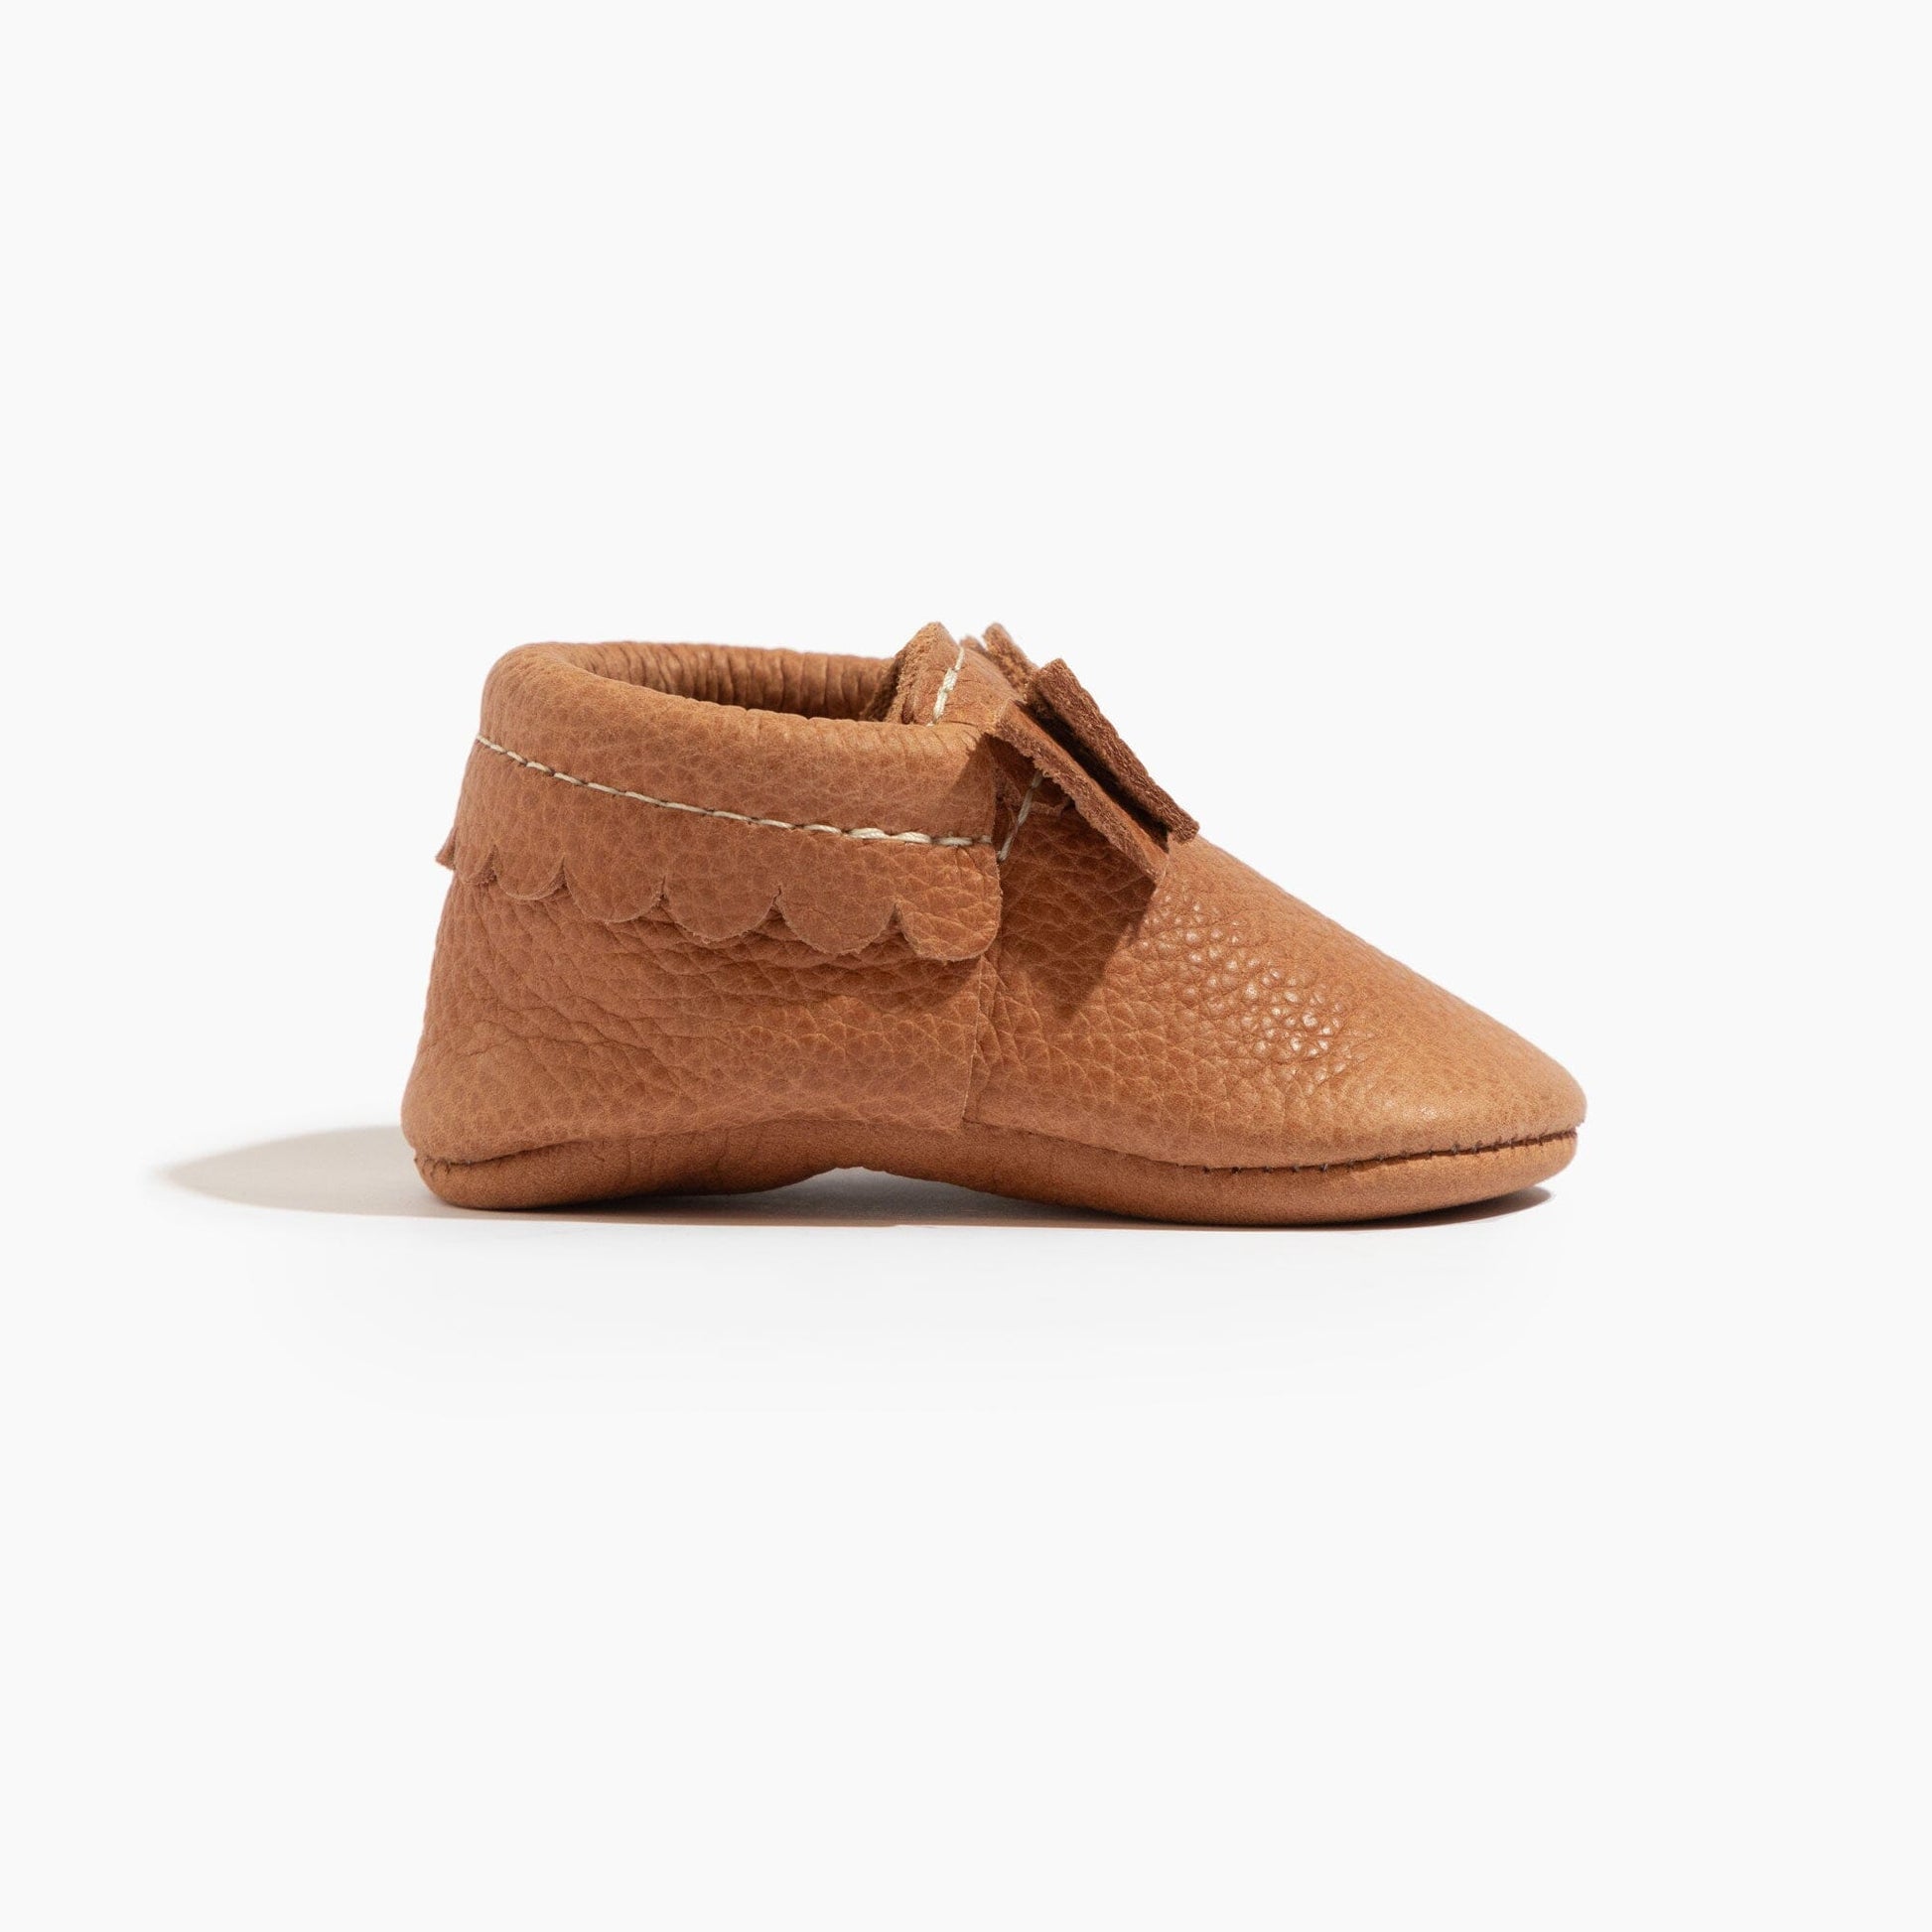 Zion Bow Baby Shoe Bow Mocc Soft Sole 